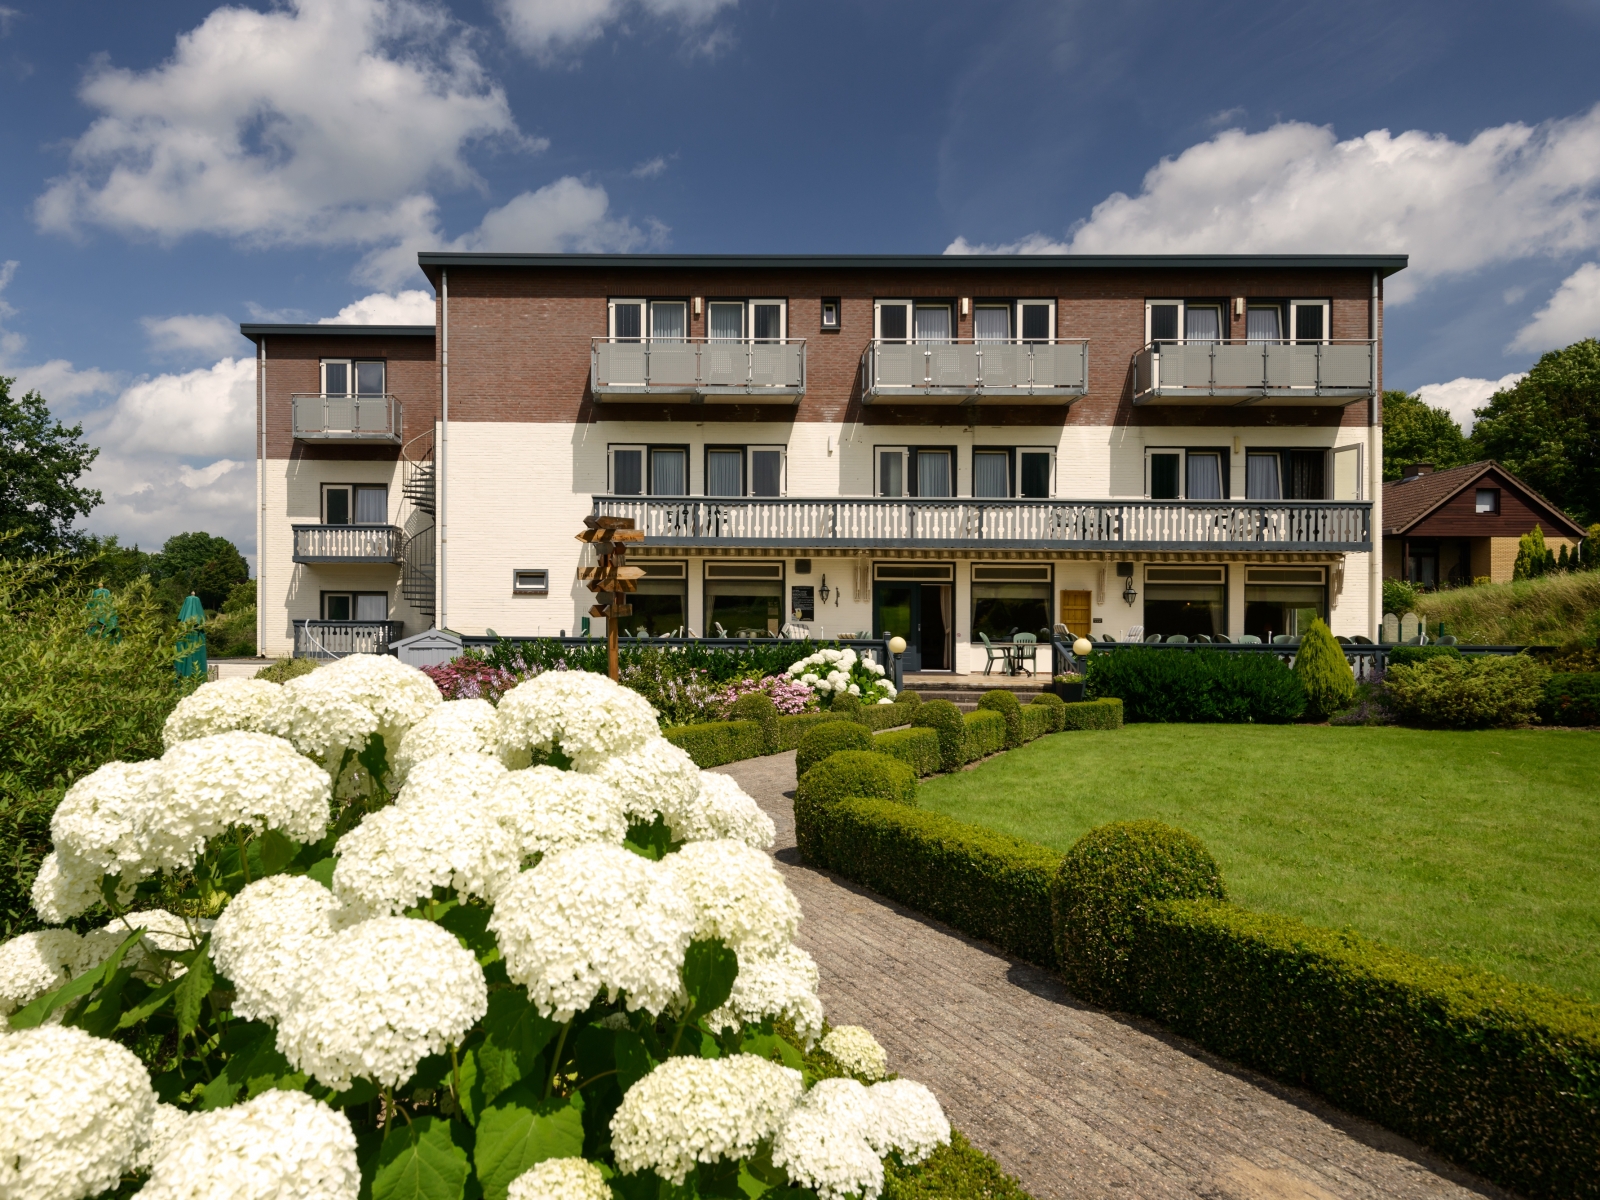 Hotel Bemelmans <br/>119.00 ew <br/> <a href='http://vakantieoplossing.nl/outpage/?id=0cb2593b91cac97c66226bc33638f608' target='_blank'>View Details</a>